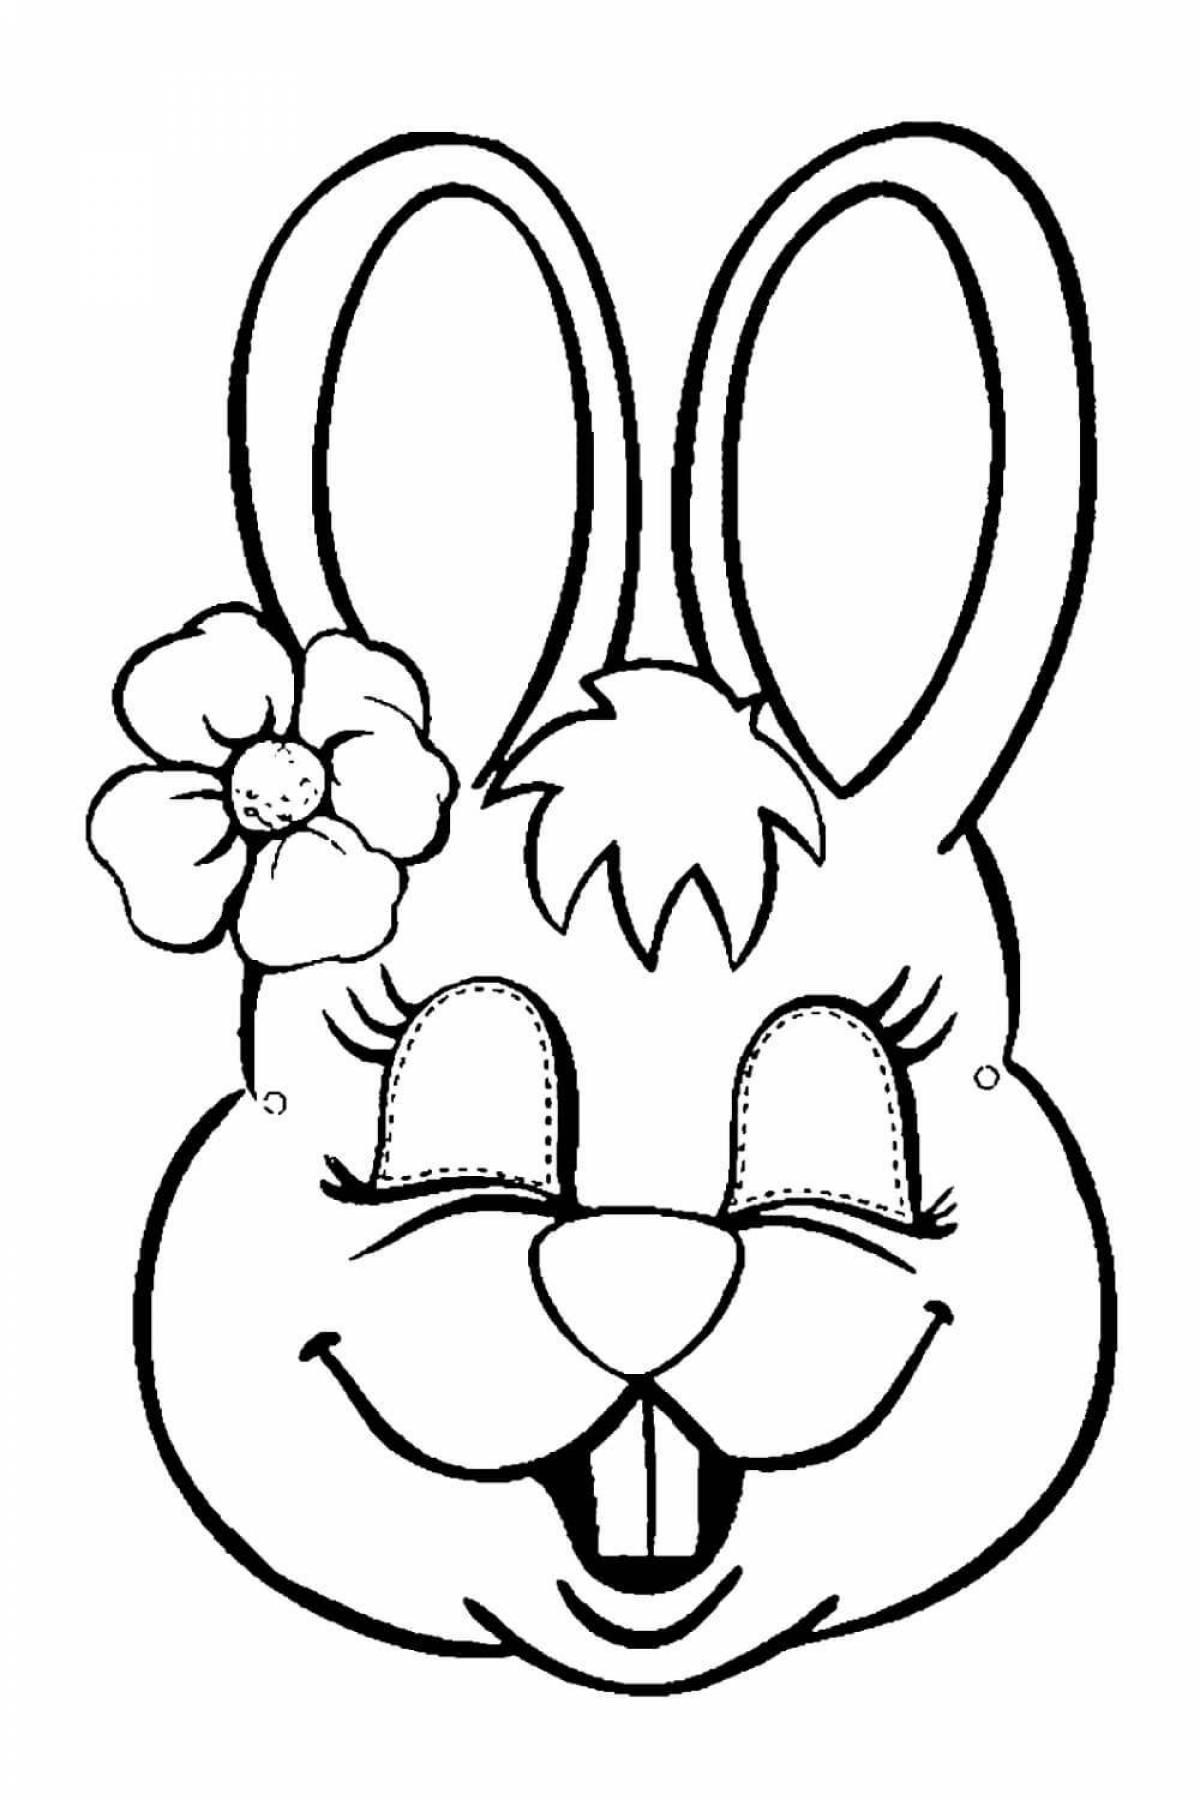 Smiling bunny face coloring book